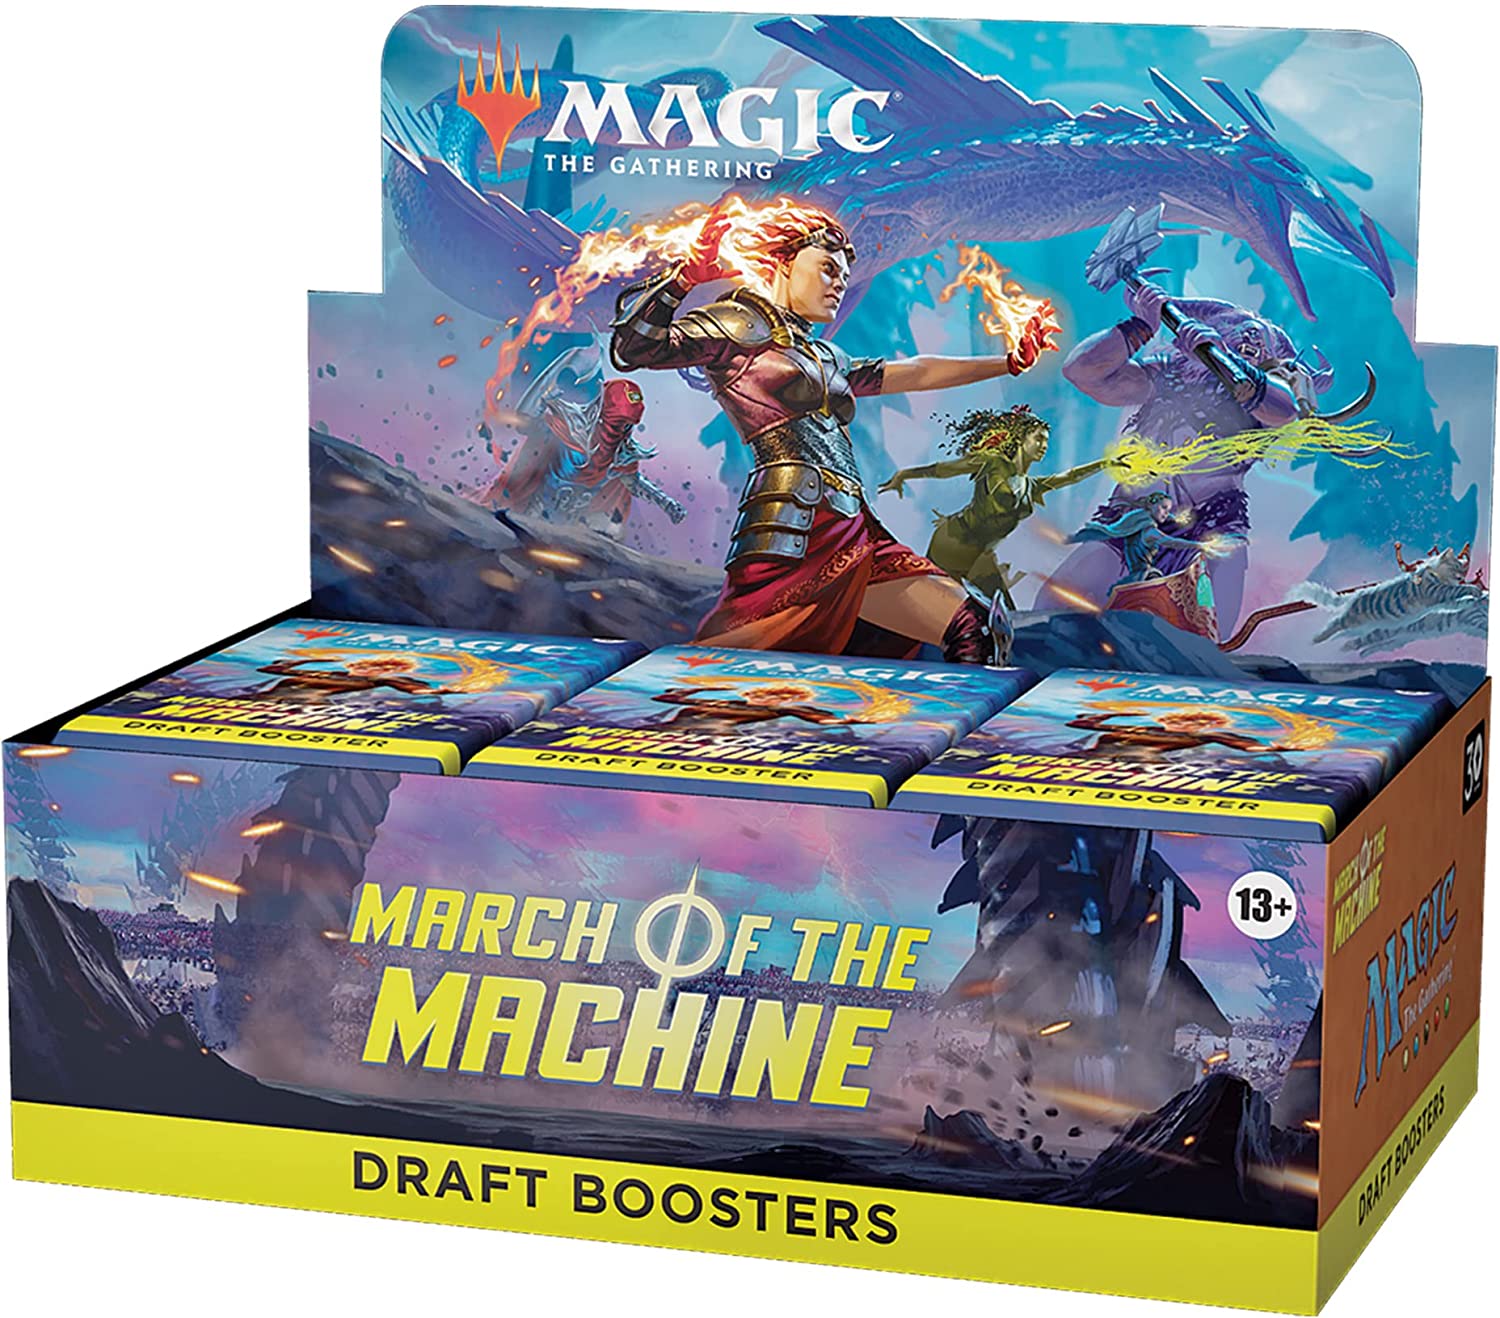 Magic To Combine Set And Draft Boosters Into New Play Booster